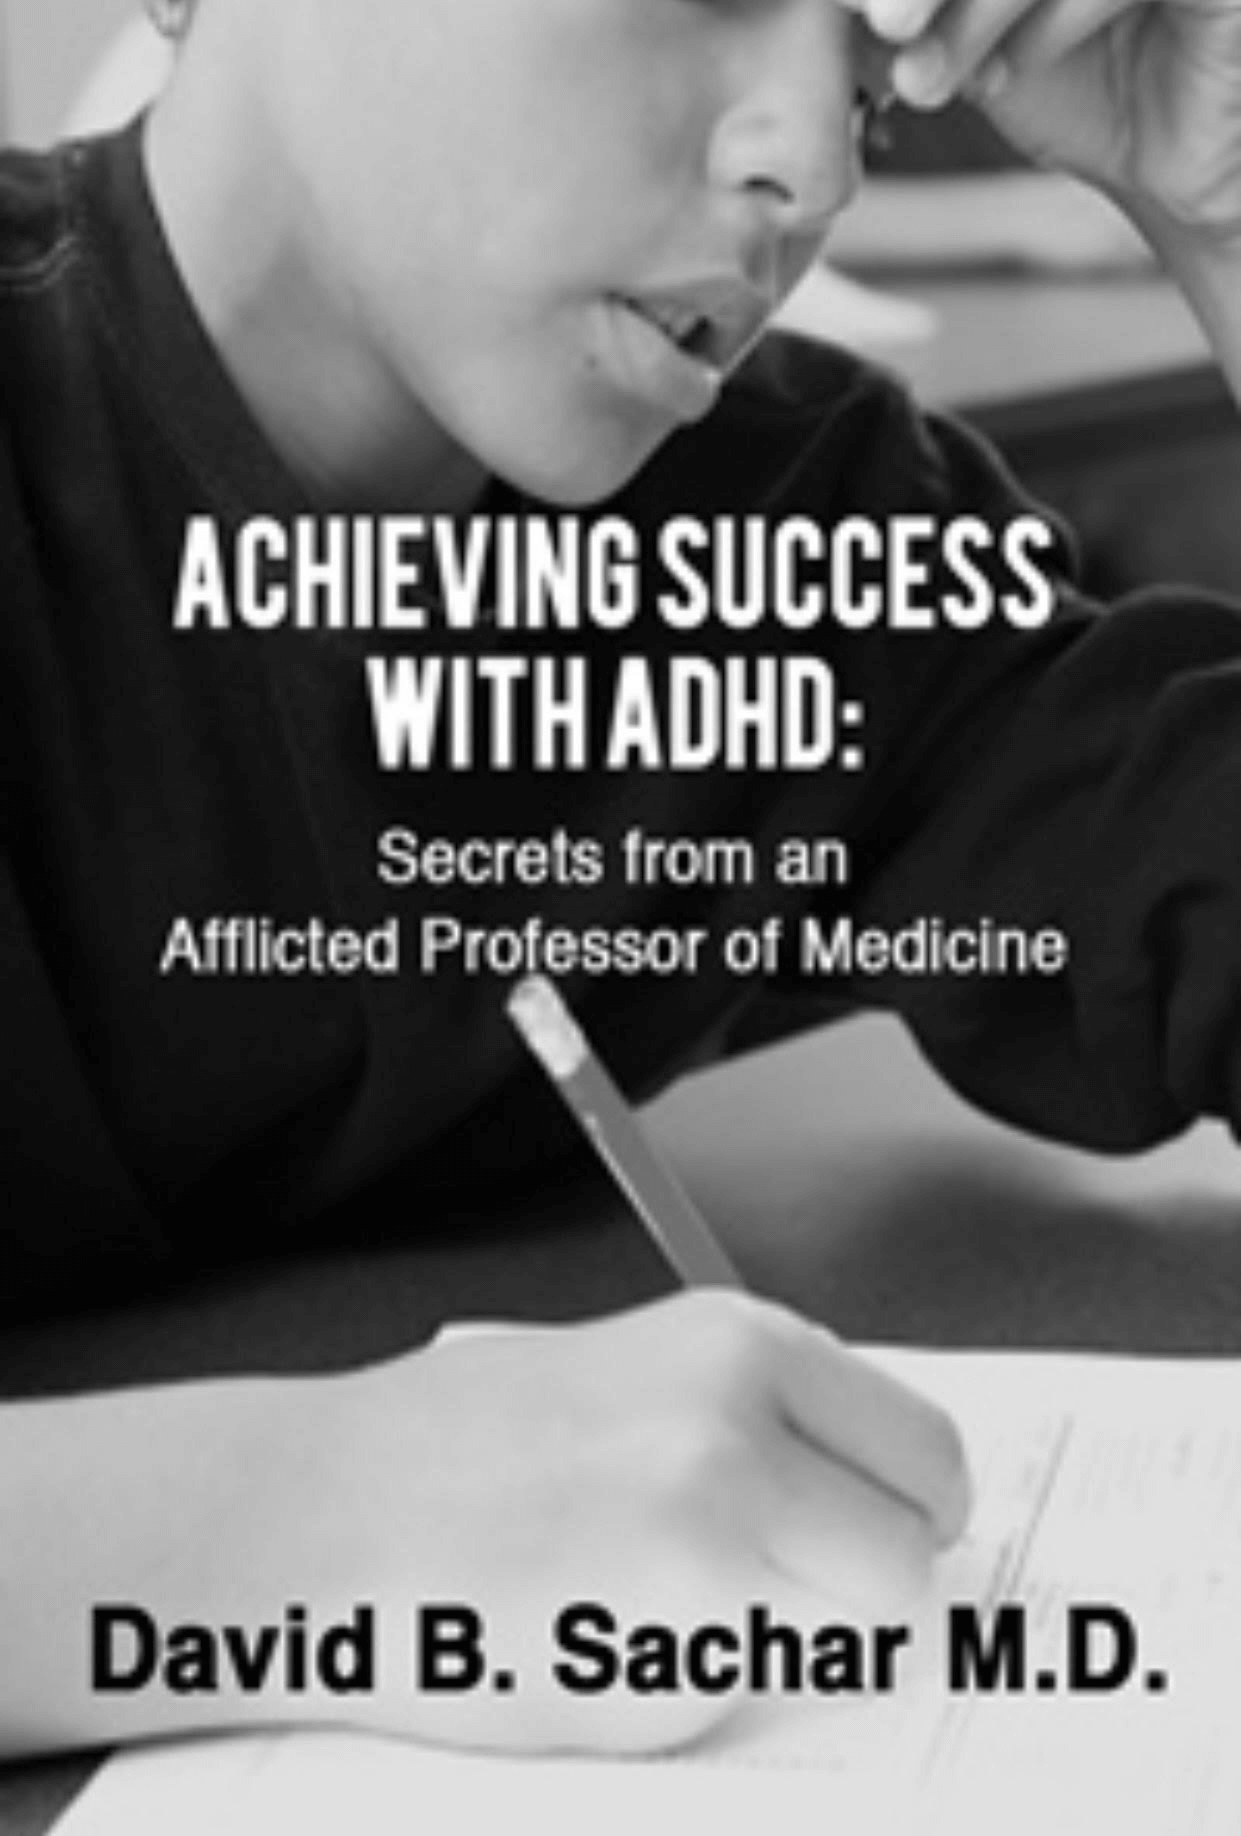 Achieve Success With ADHD